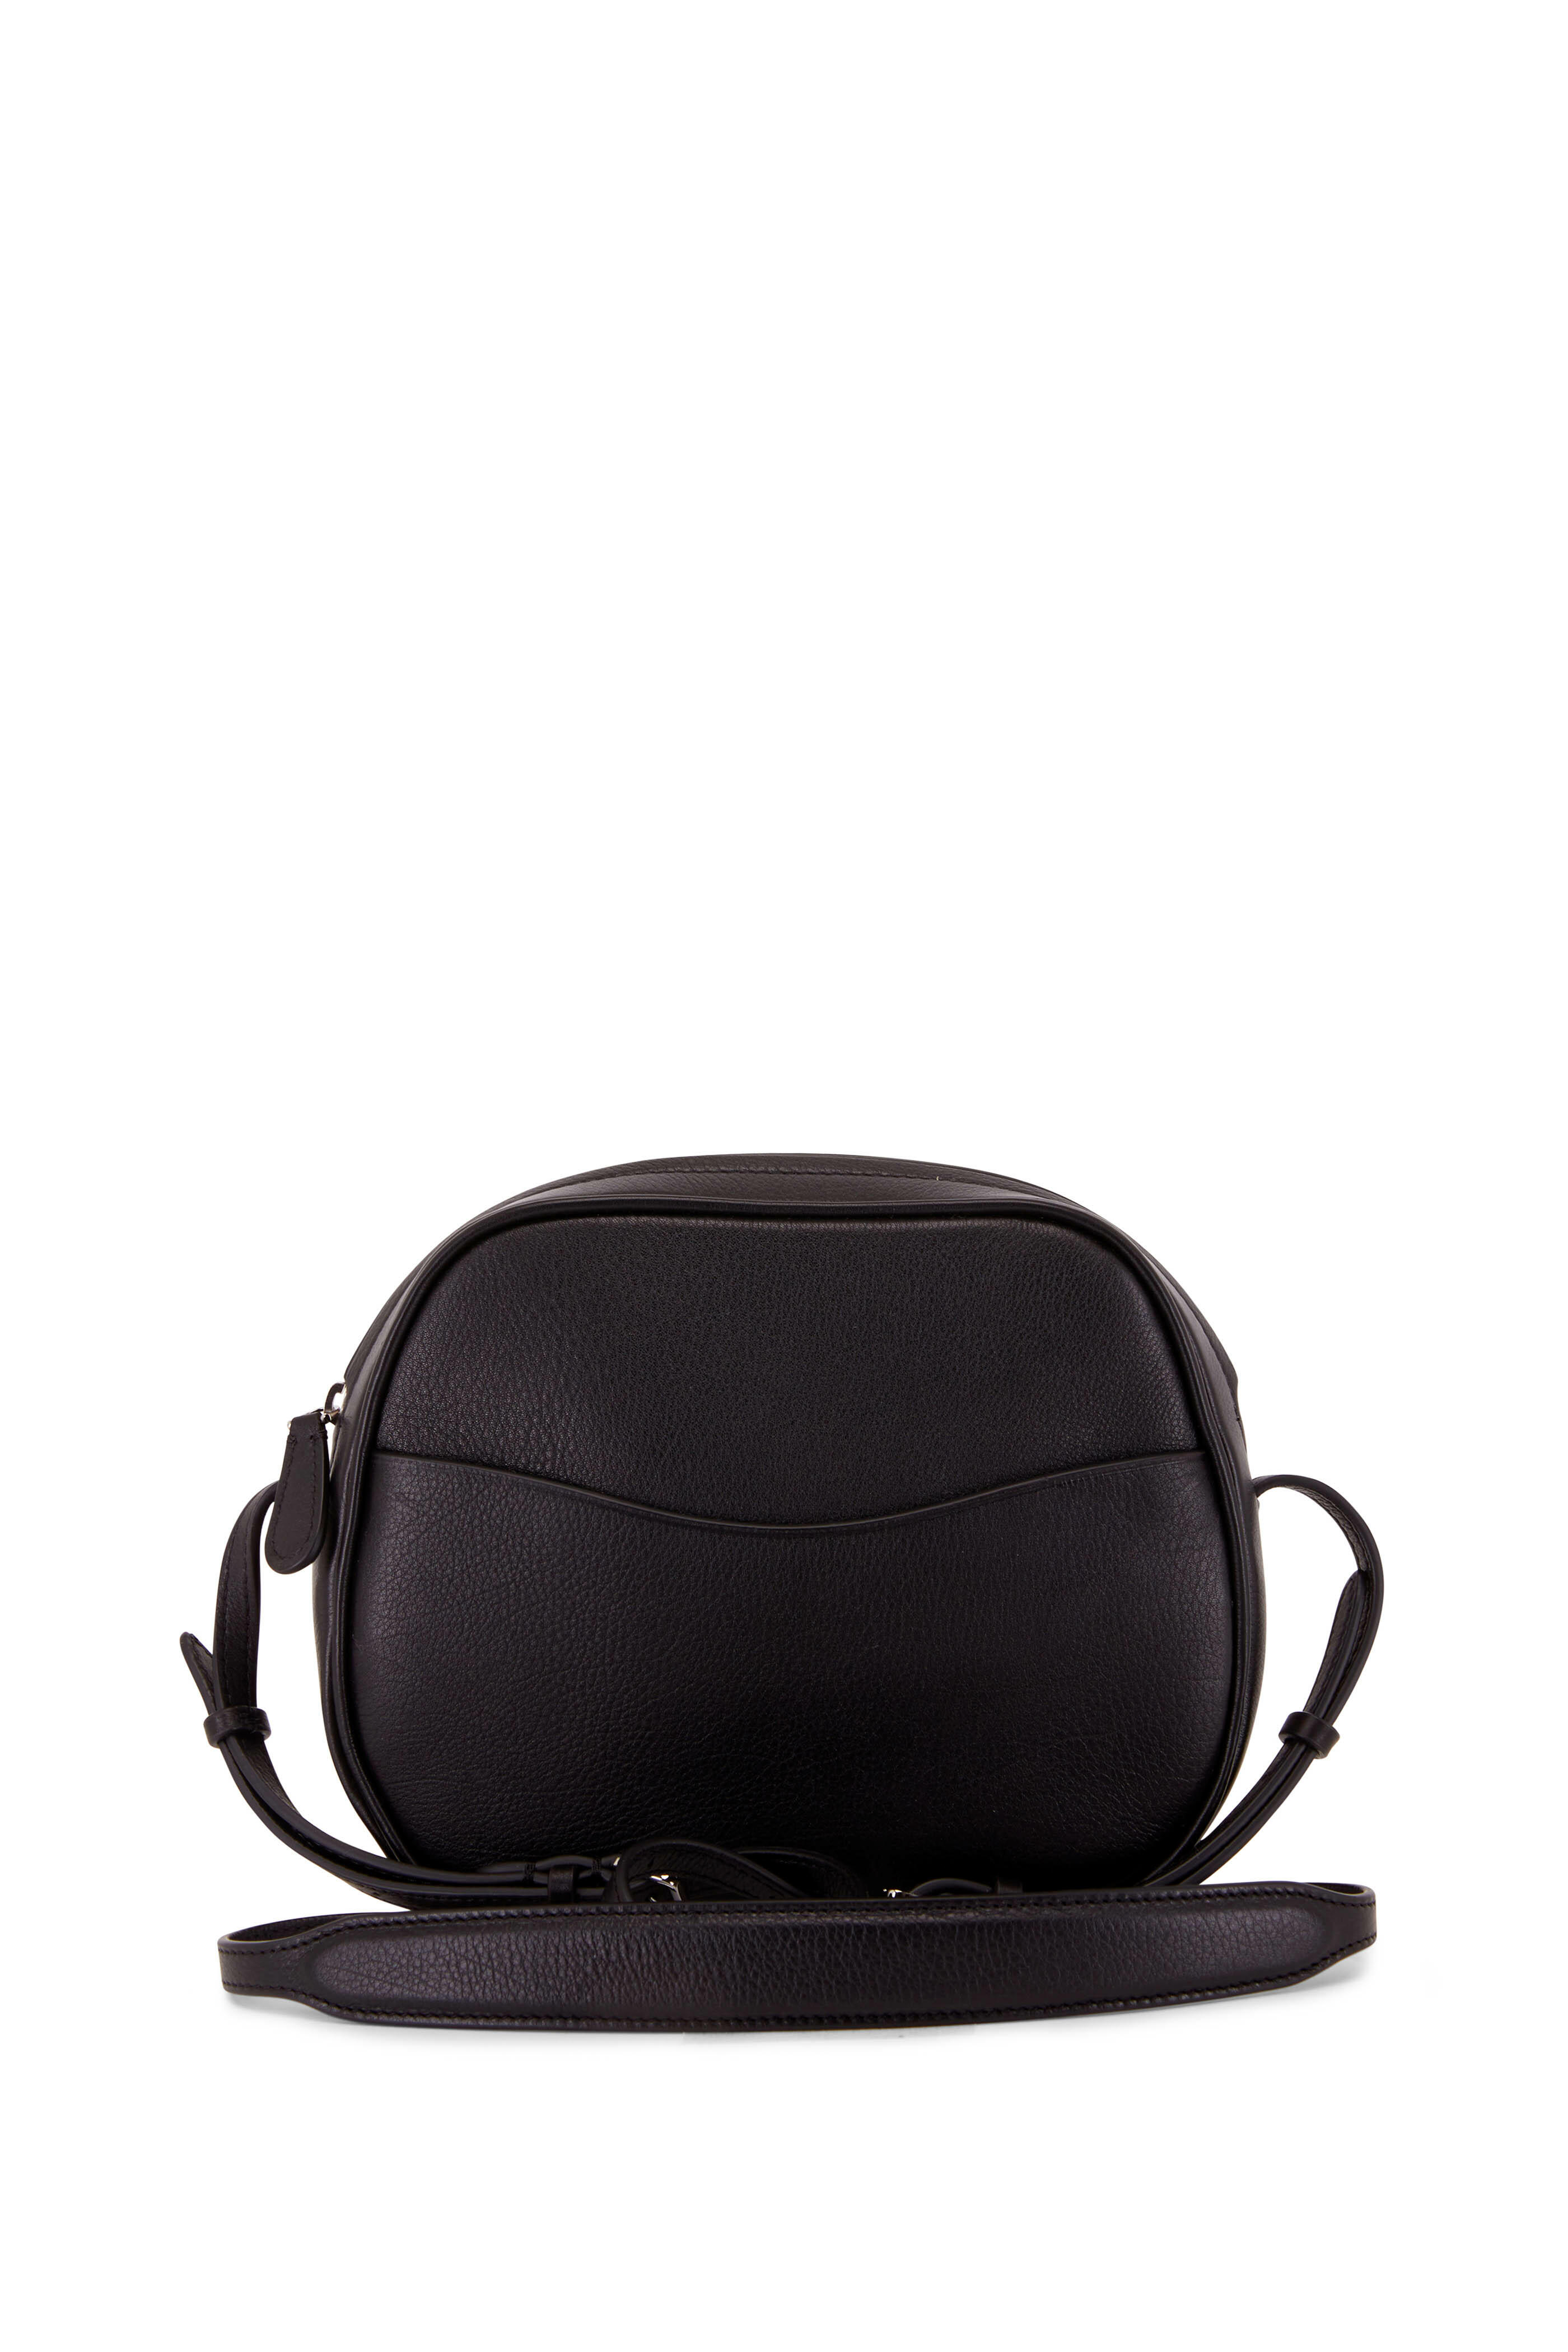 The Row - Eve Black Leather Crossbody | Mitchell Stores